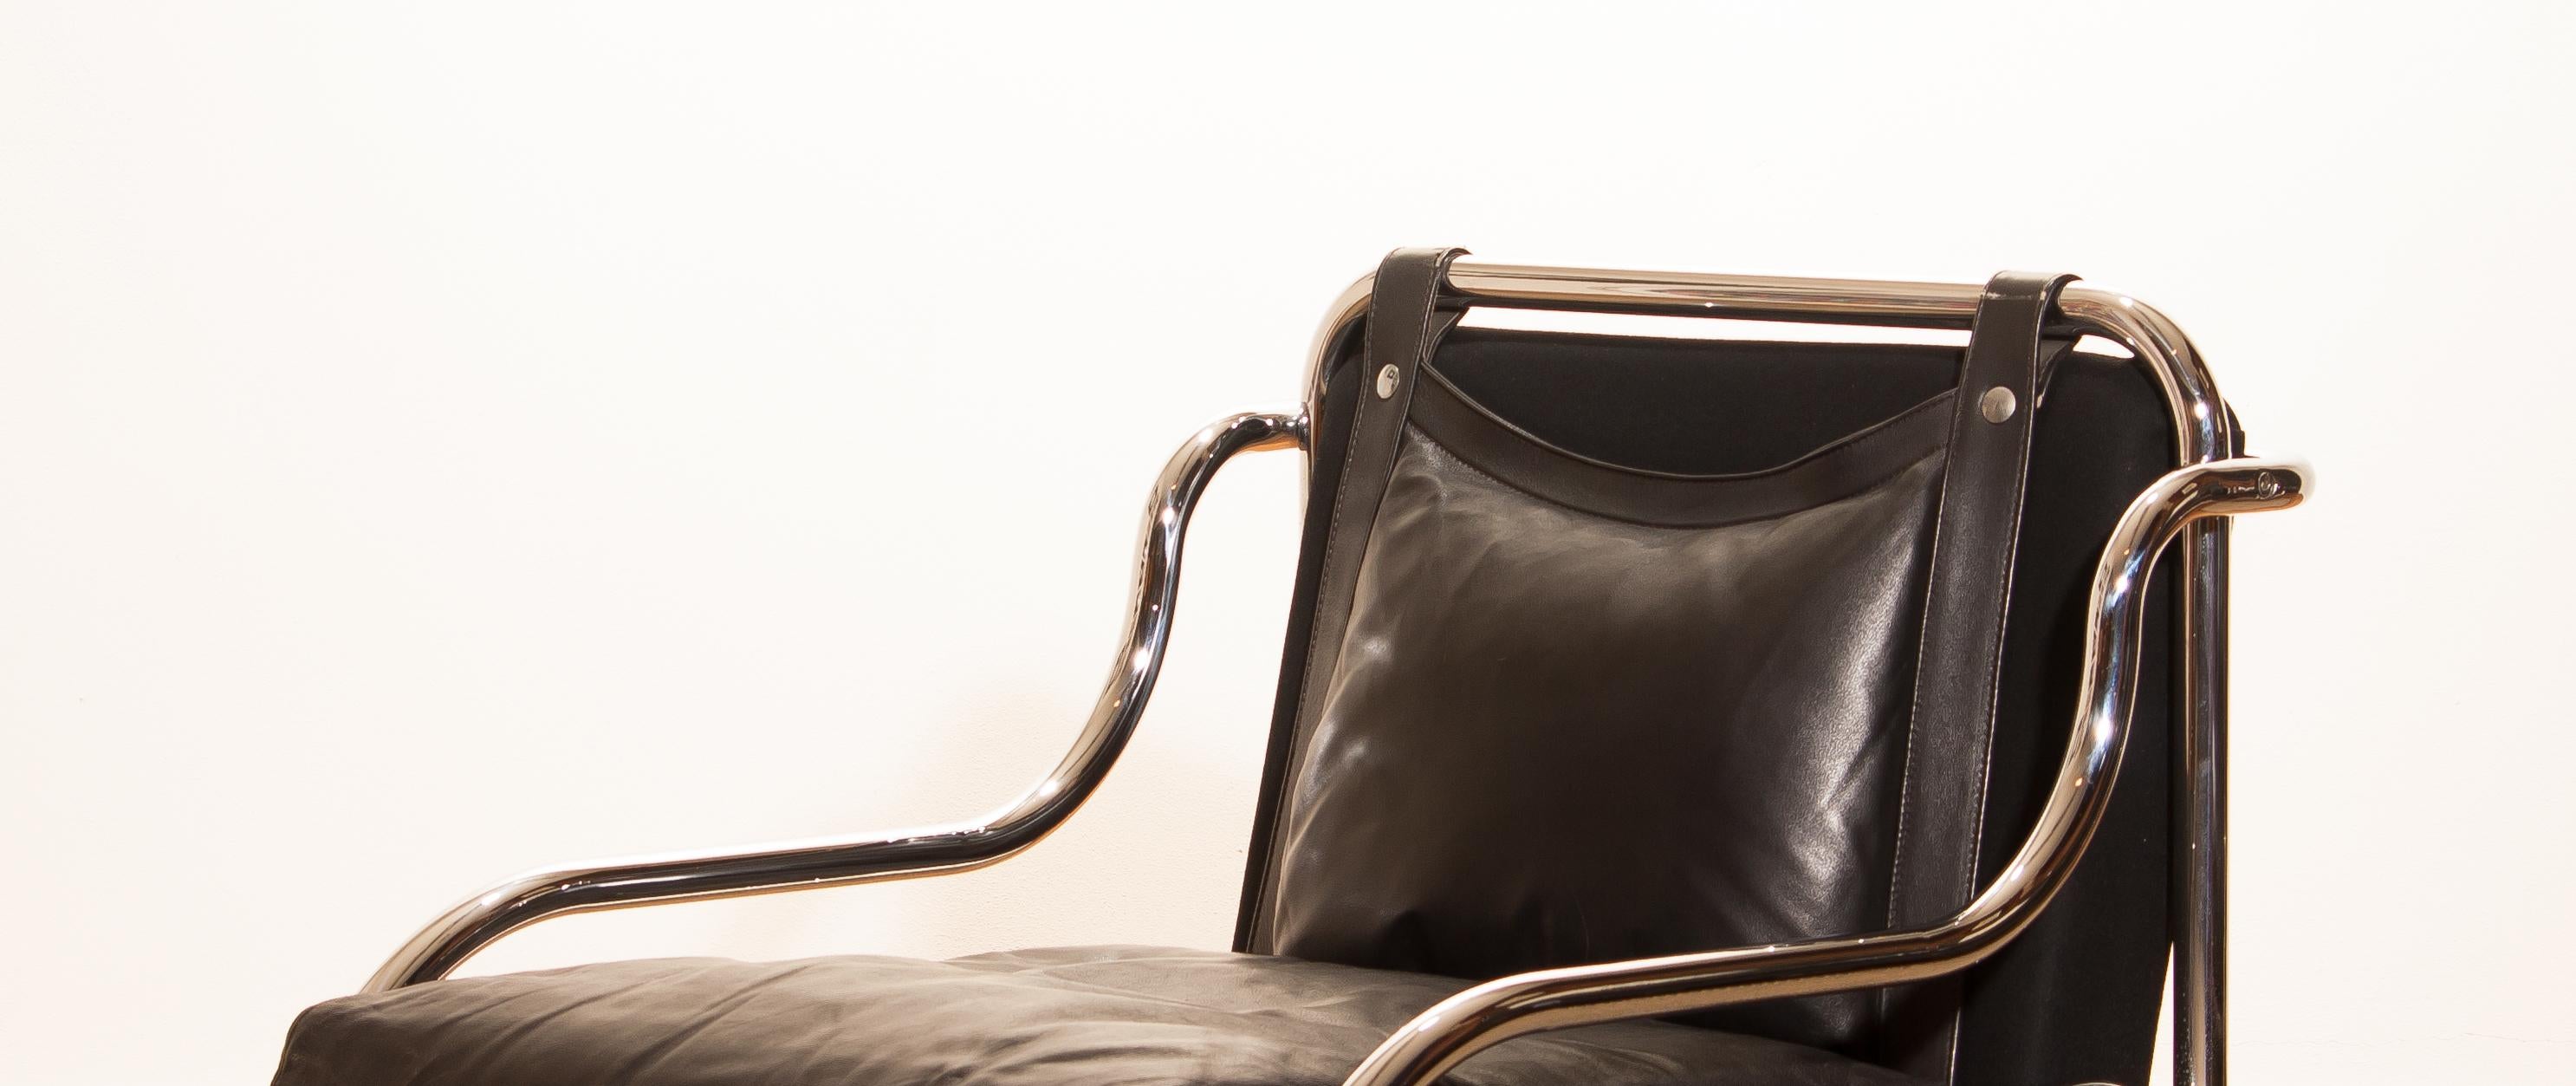 Italian 1960s, Leather and Chrome Lounge Sofa and Chair by Gae Aulenti for Poltronova